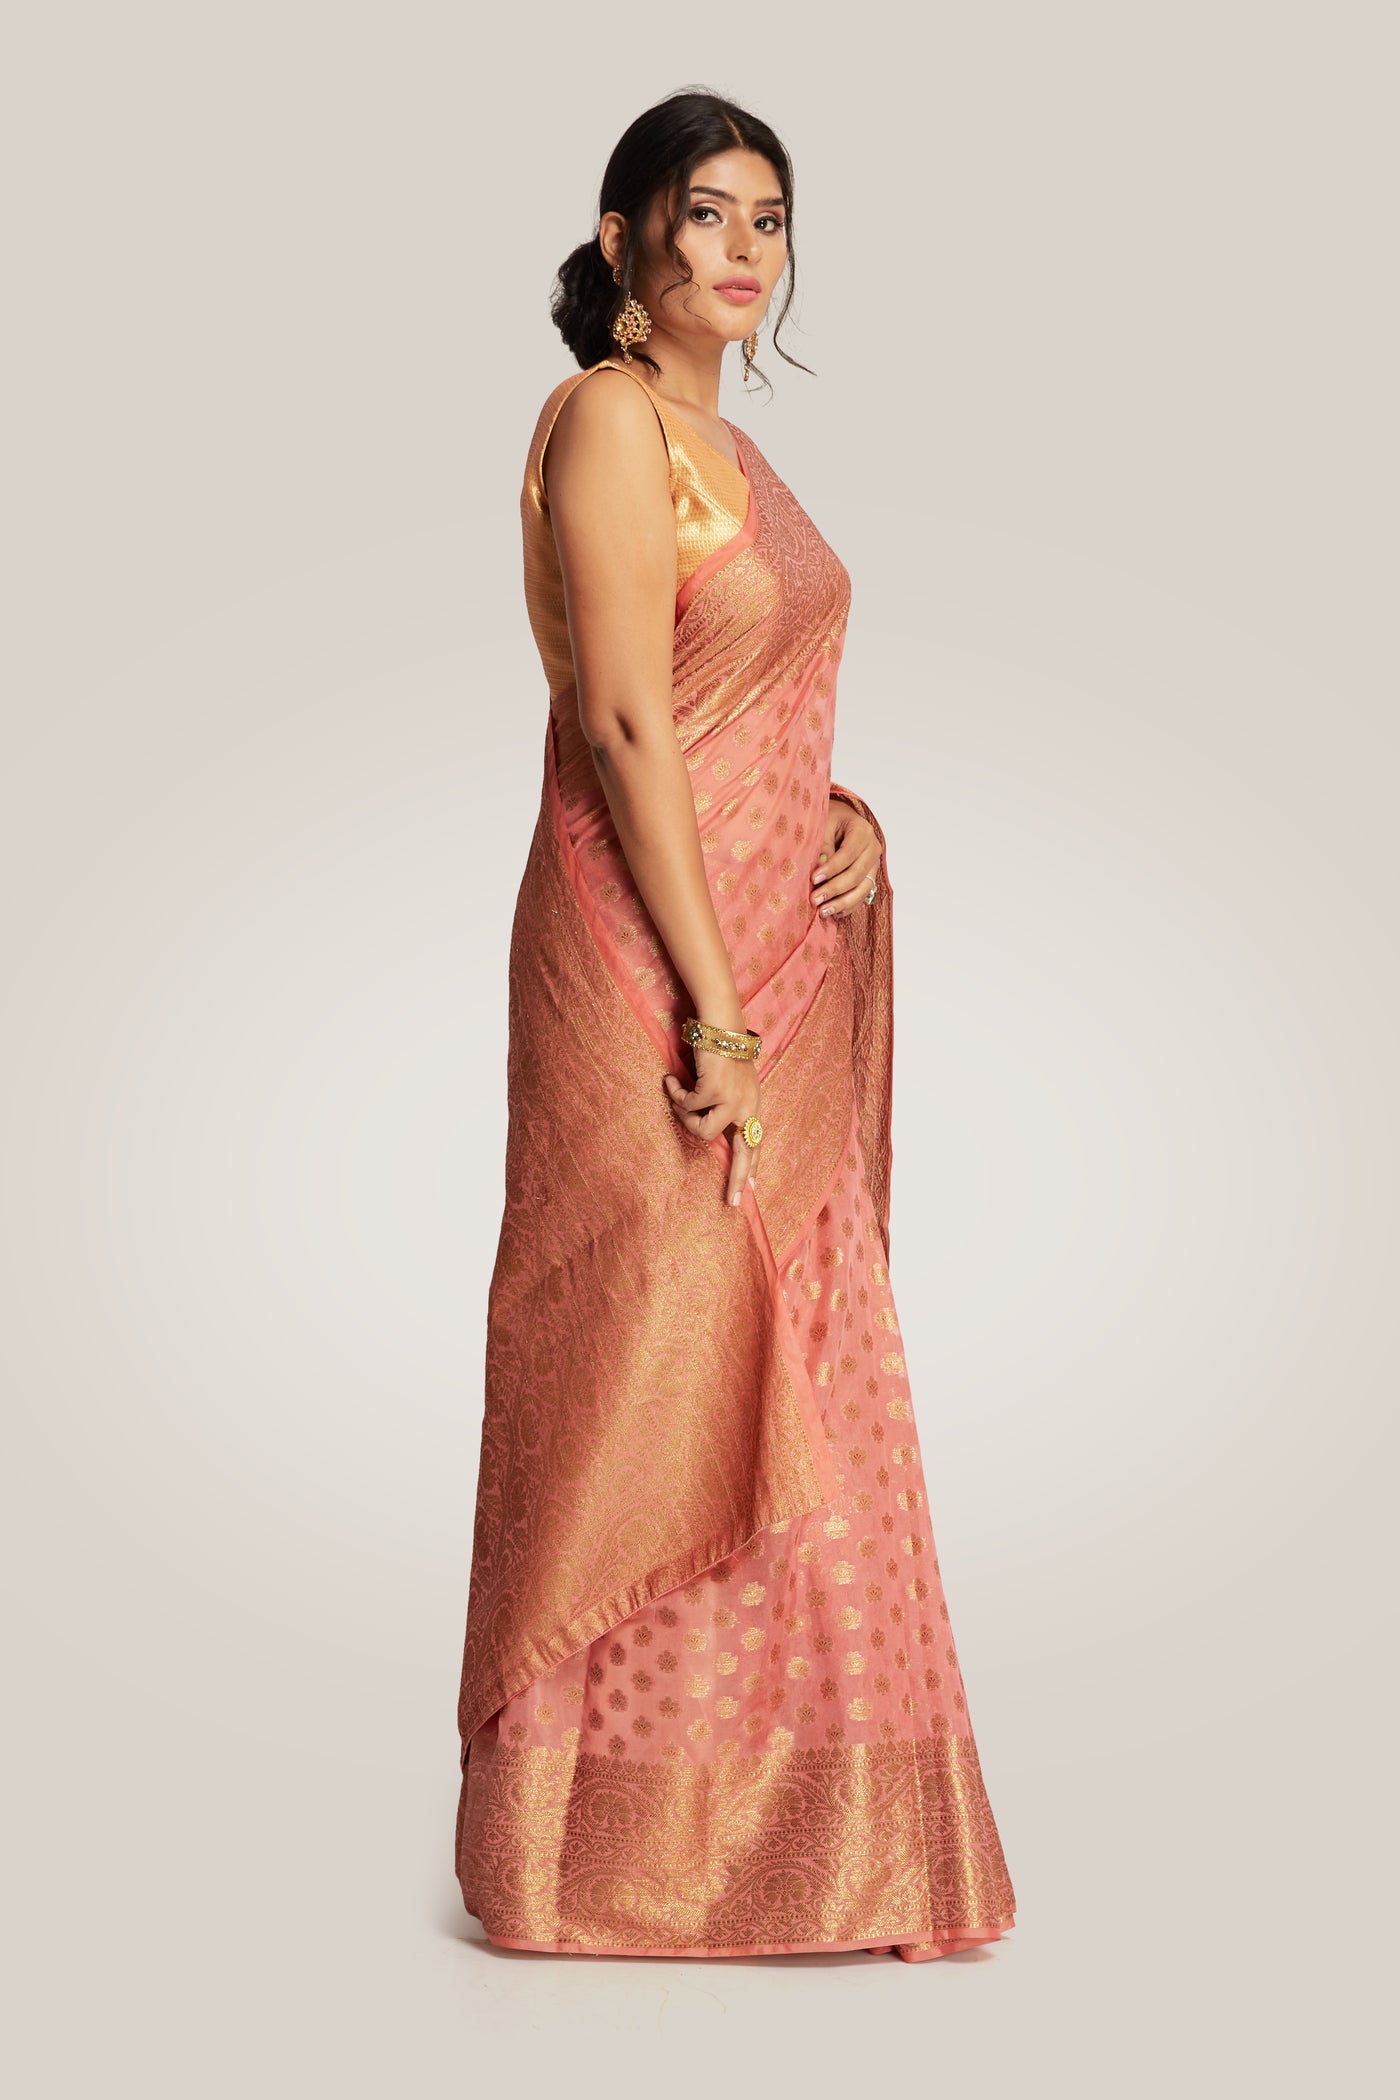 Coral Banarasi Saree Indian Clothing in Denver, CO, Aurora, CO, Boulder, CO, Fort Collins, CO, Colorado Springs, CO, Parker, CO, Highlands Ranch, CO, Cherry Creek, CO, Centennial, CO, and Longmont, CO. NATIONWIDE SHIPPING USA- India Fashion X